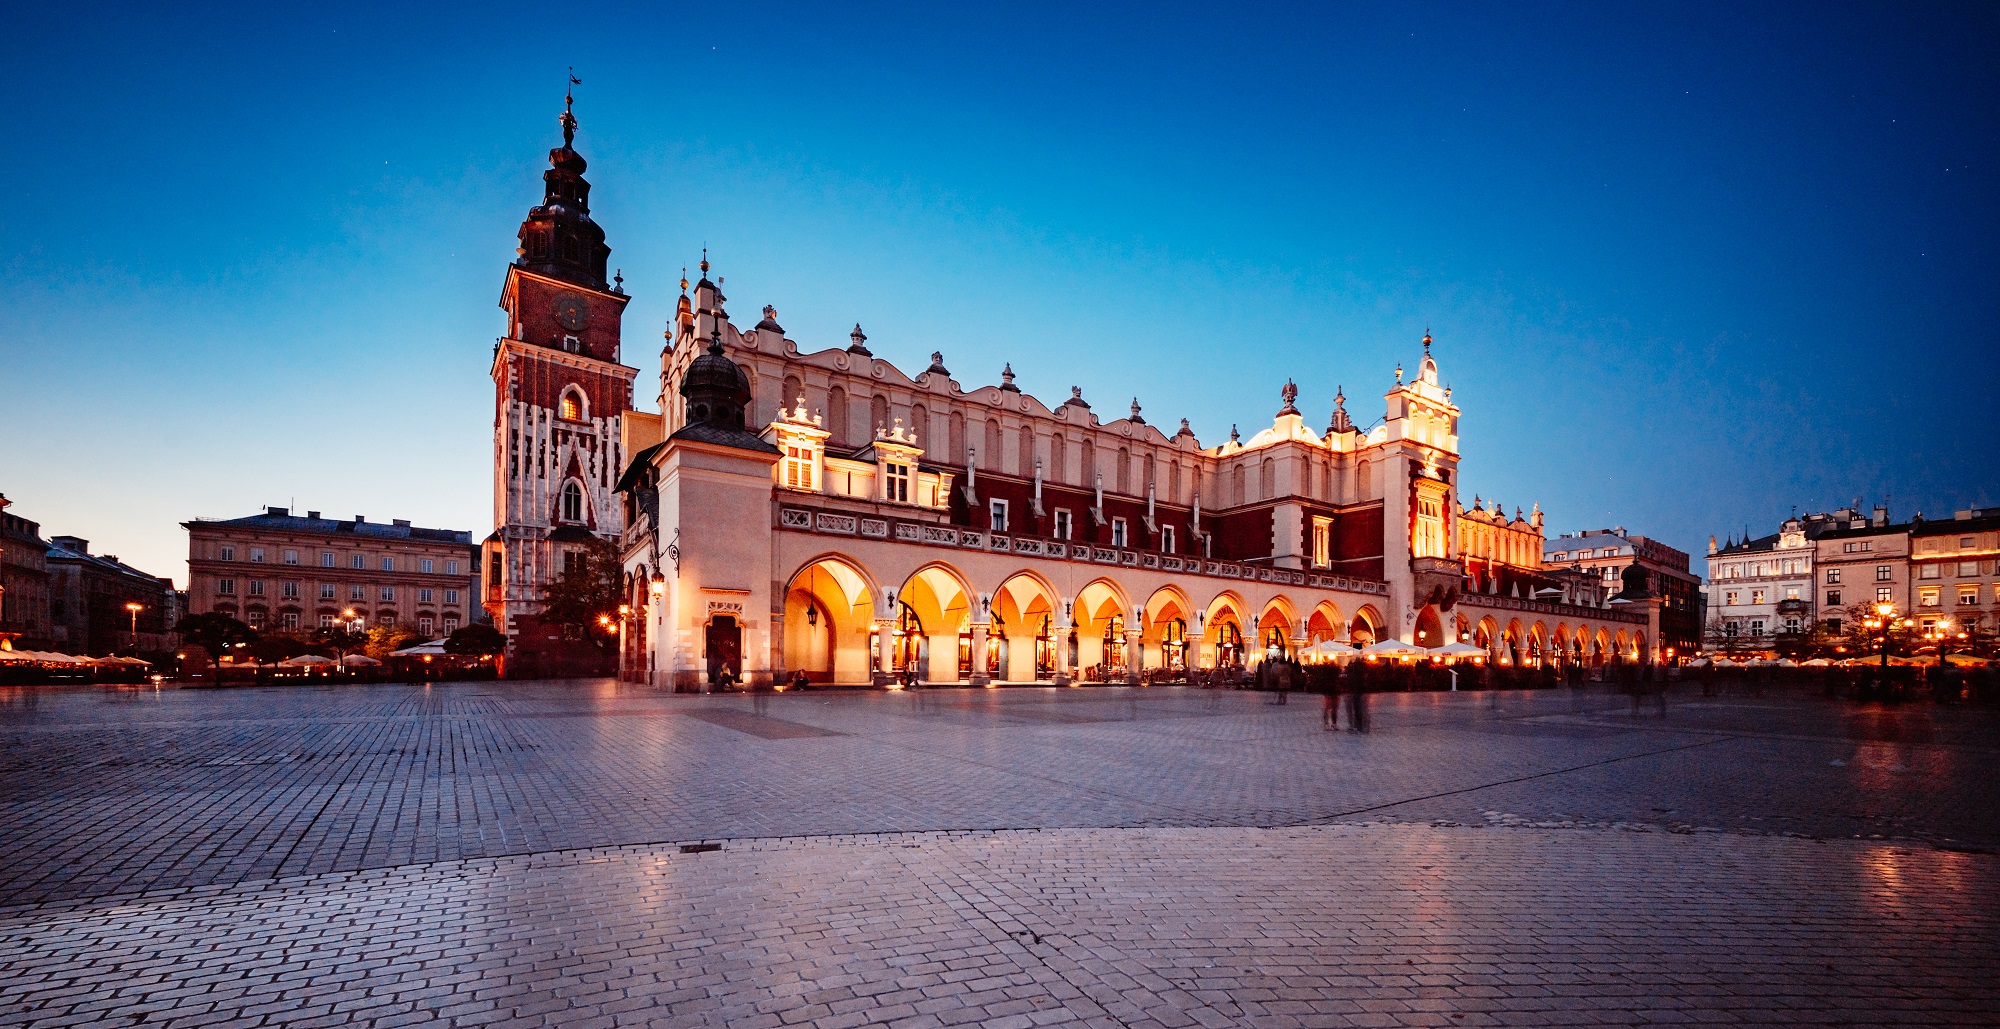 Krakow-Mainsquare-st-mary-s-basilica-in-main-square-of-krakow-wawel-castle-historic-center-city-with-ancient-architecture